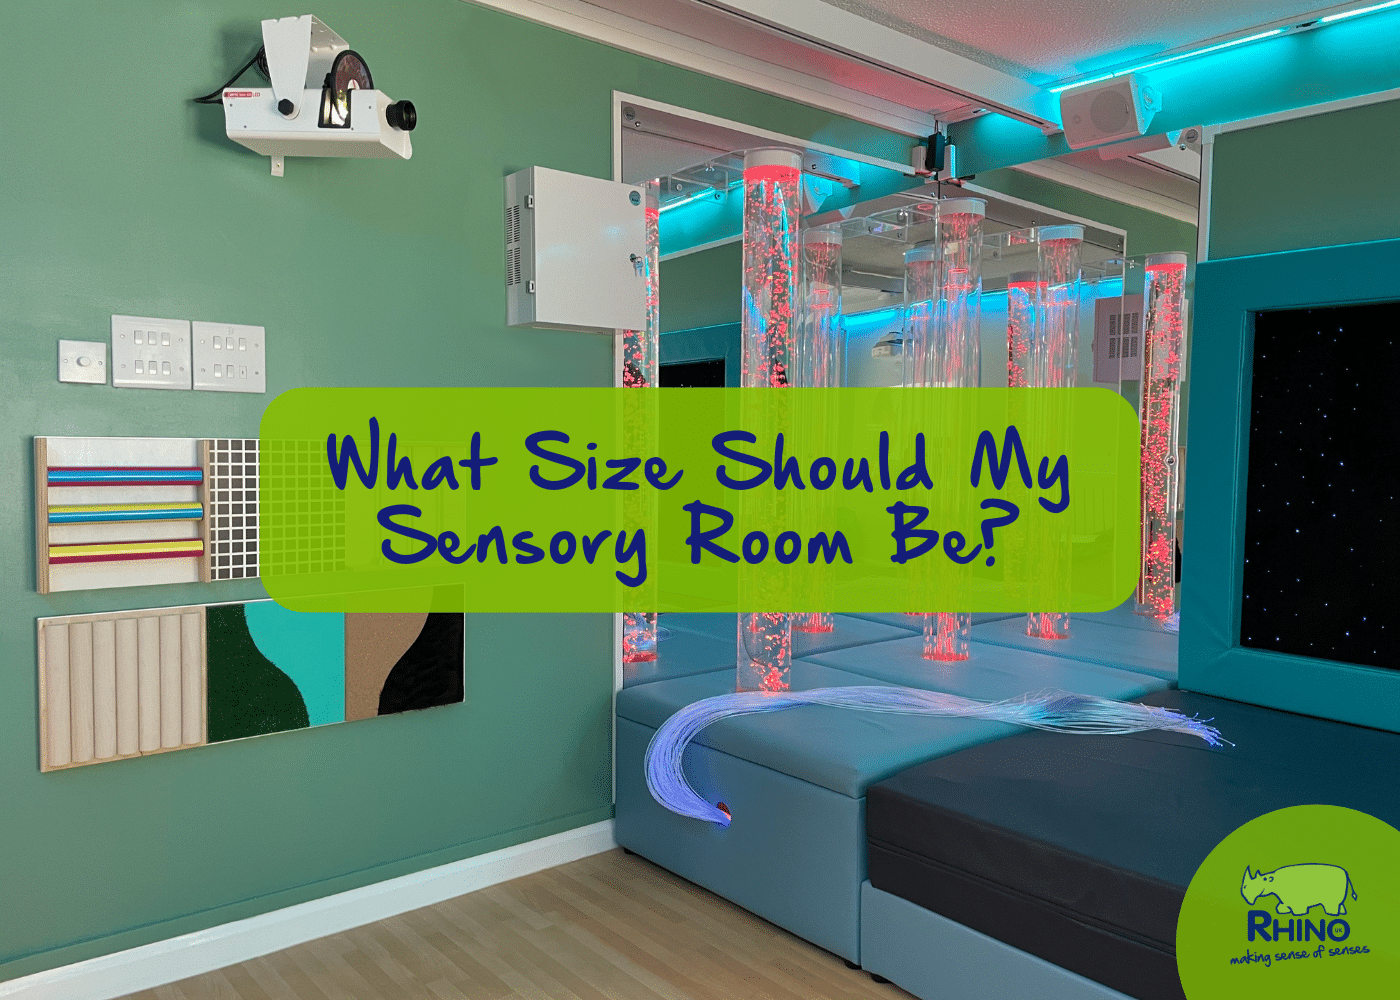 What Size Should My Sensory Room Be?